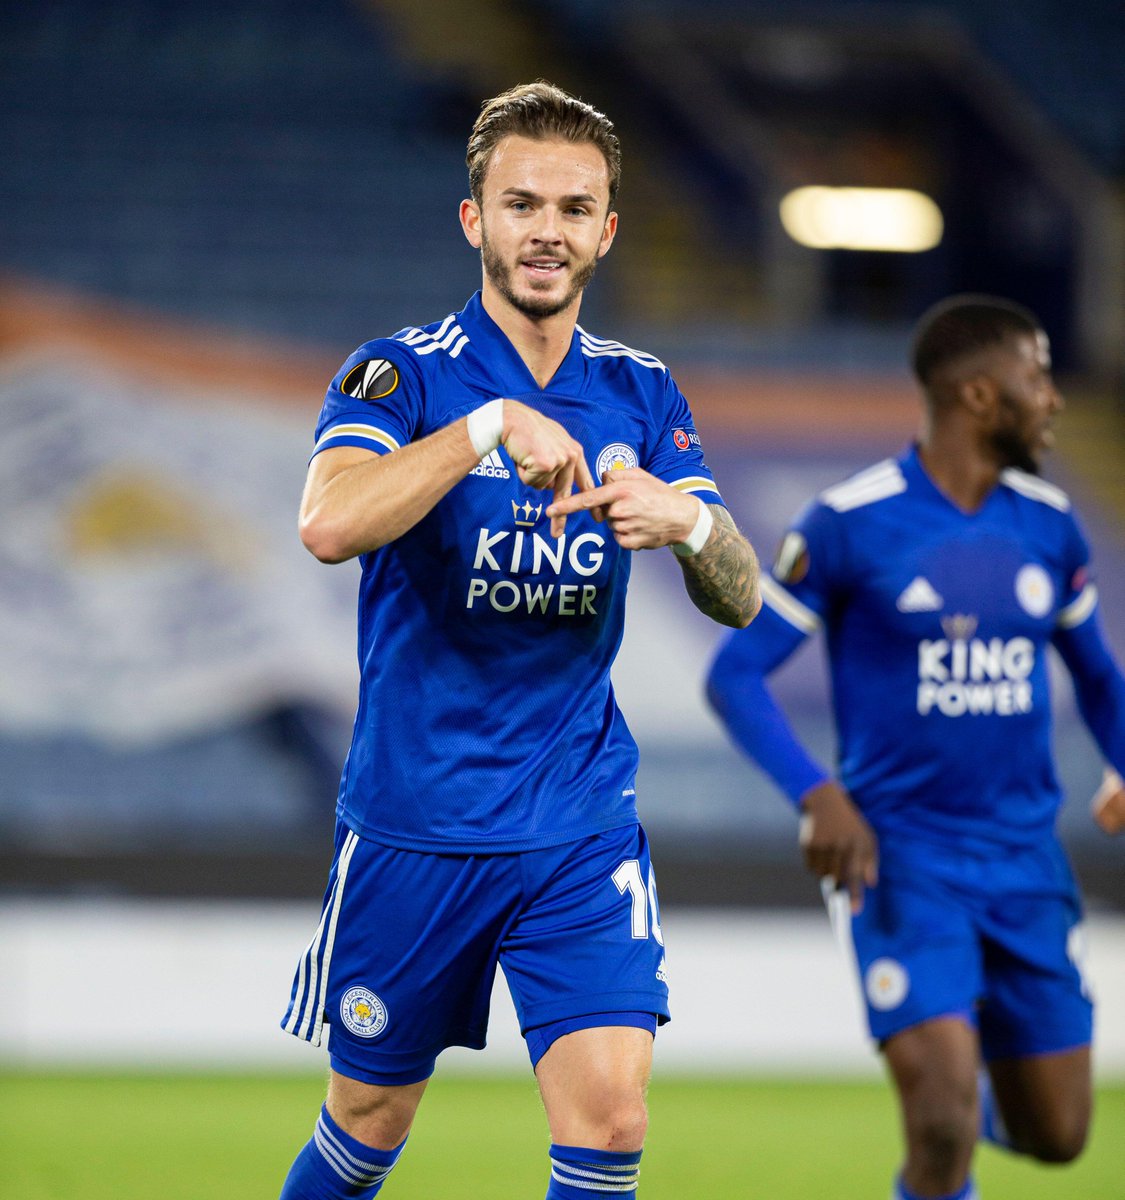  Trust in Maddison for Leicester's run of good fixtures